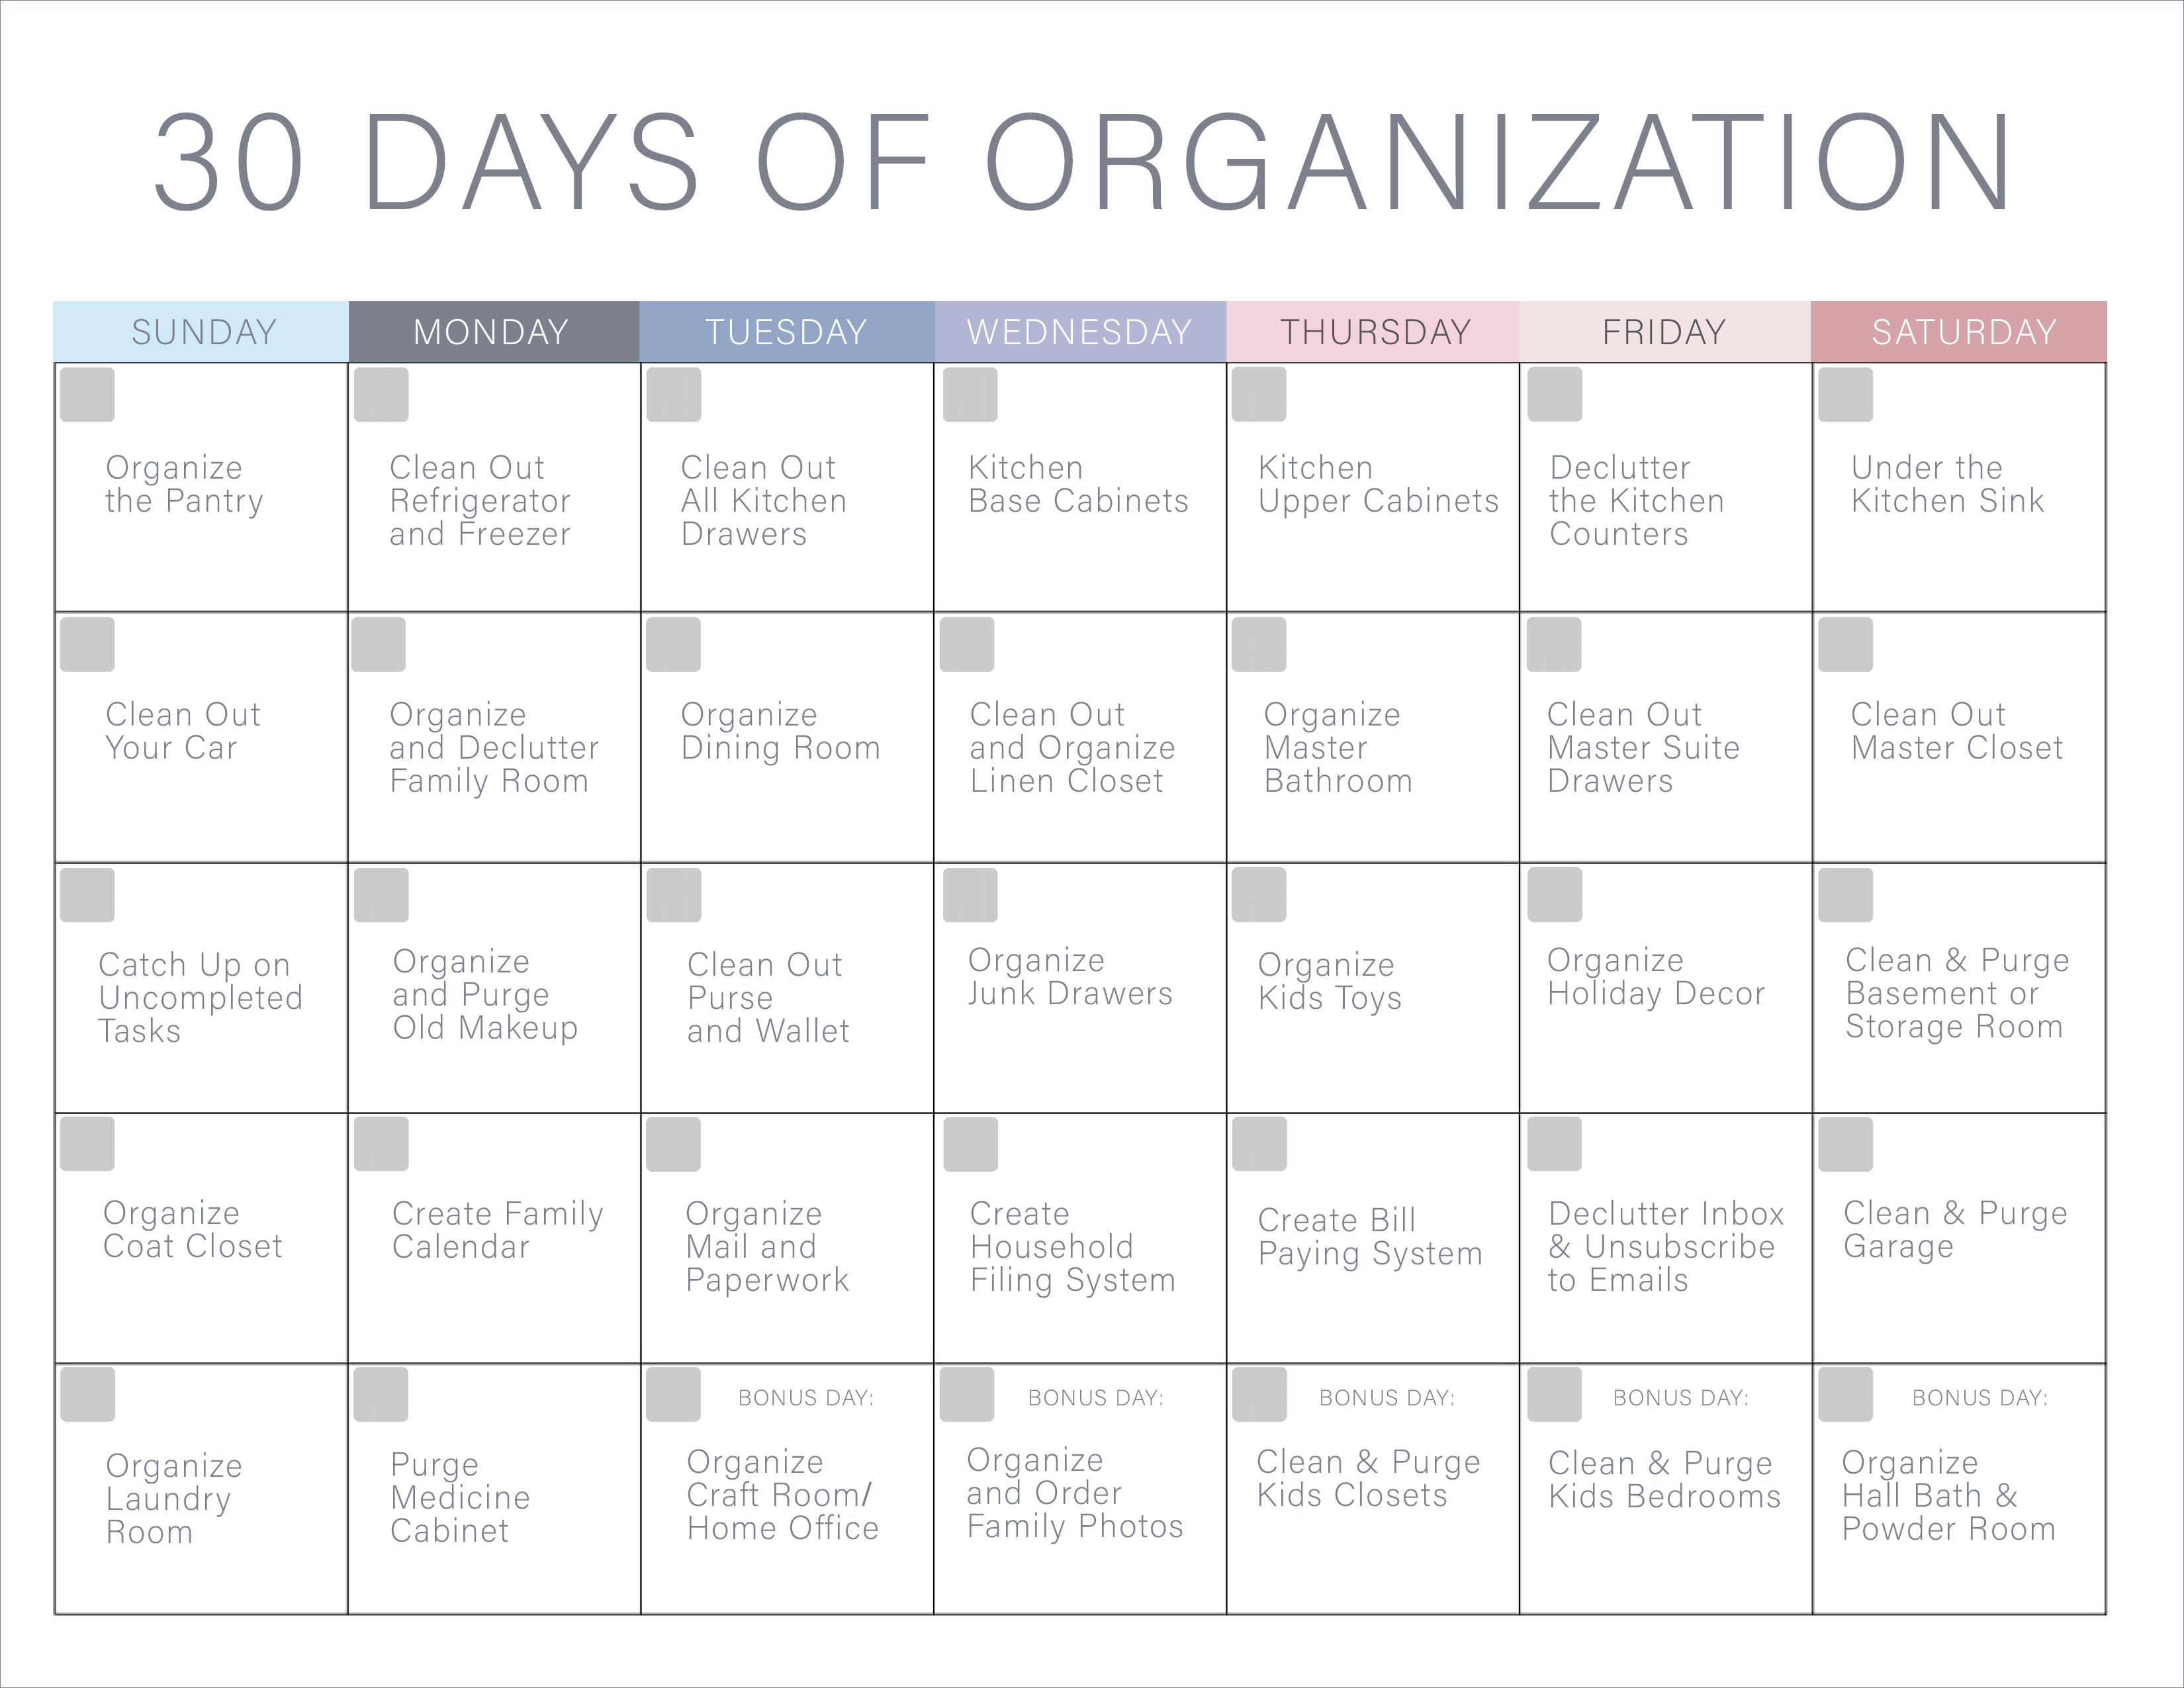 30 Days Of Organization Challenge - Declutter Your Home!